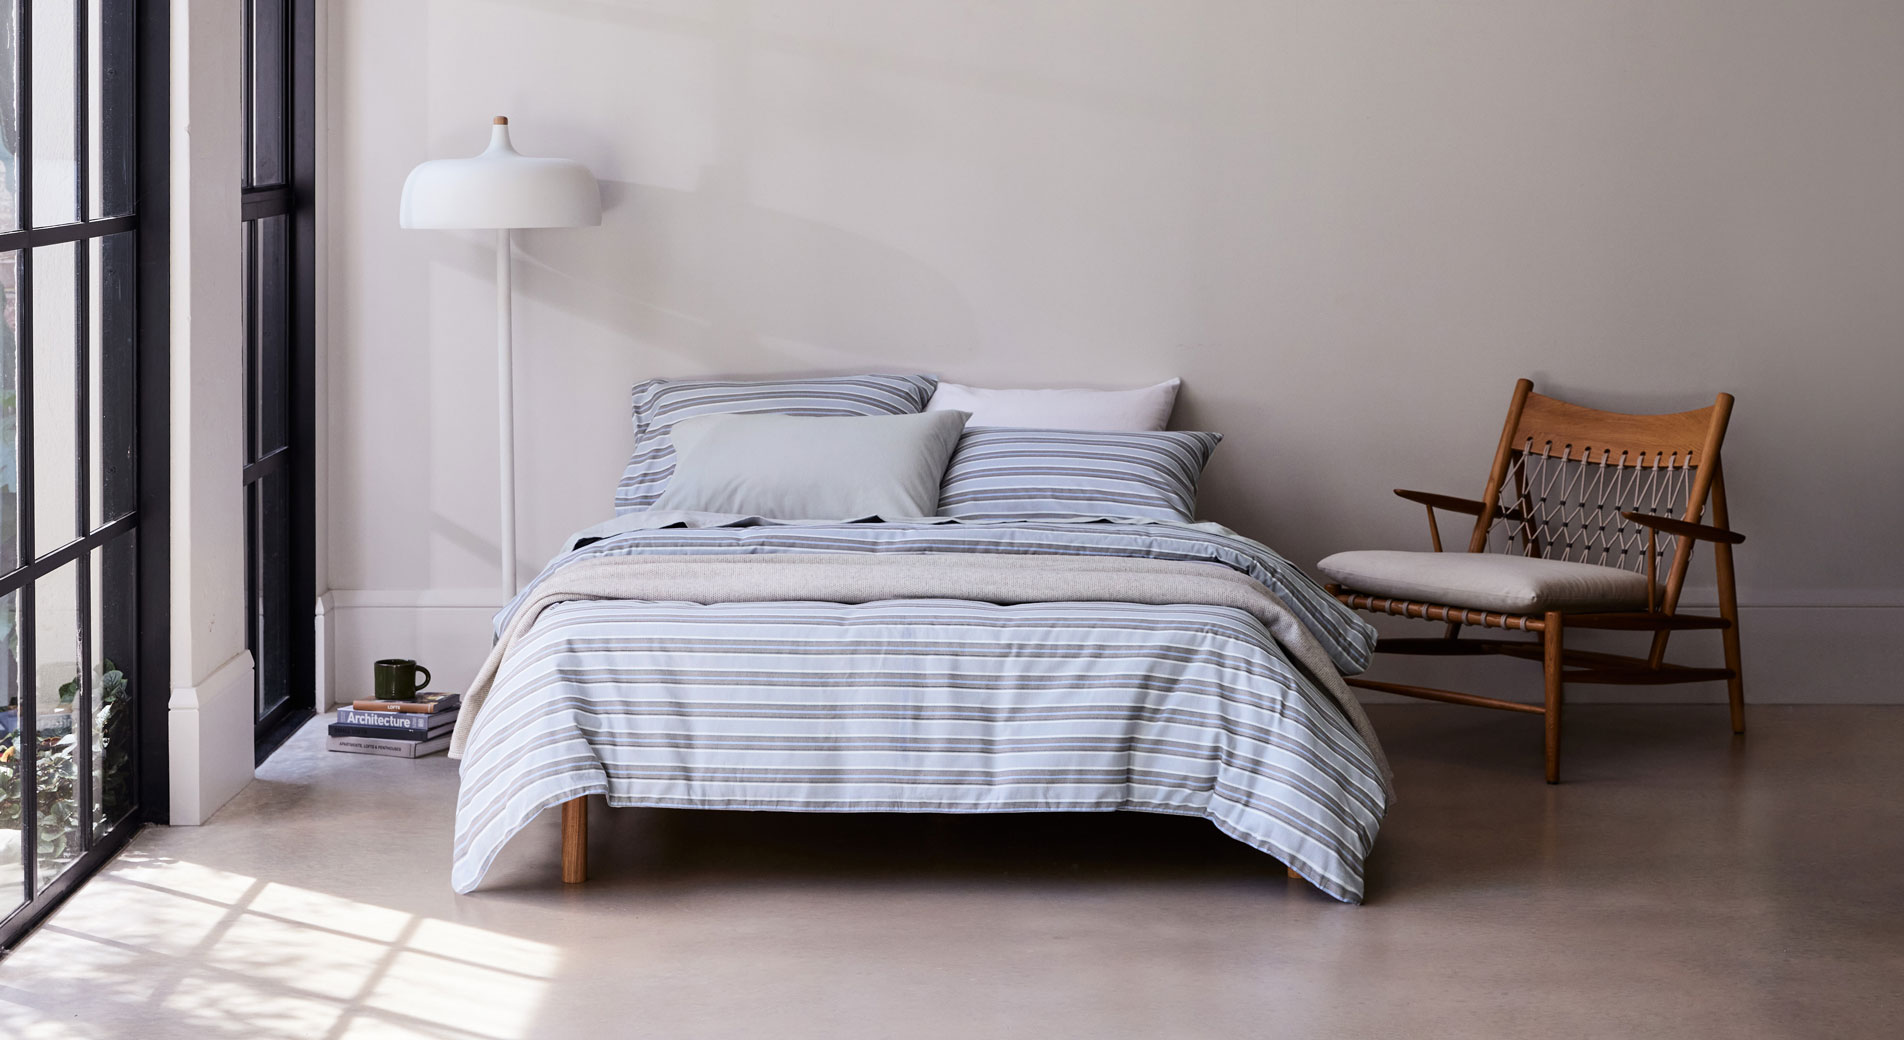 A bed dressed in blue striped flannelette bedding sits in a modern bedroom with concrete floors and French windows. Next to the bed is a wooden armchair, a white lamp and a small stack of books with a mug sitting on top.